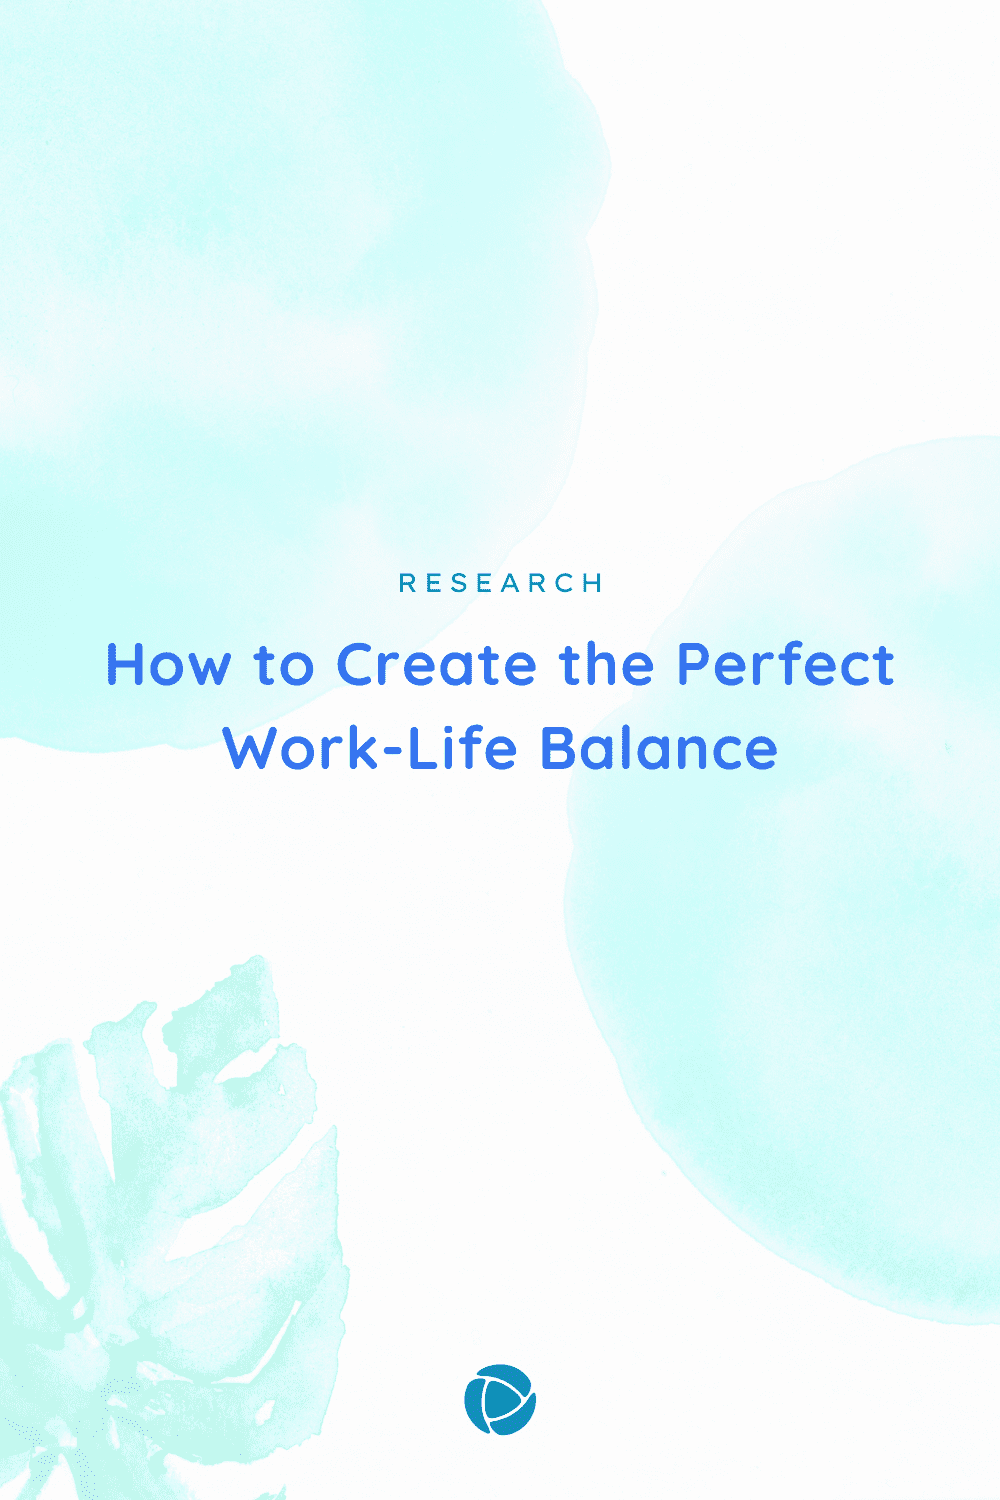 How to Create the Perfect Work-Life Balance